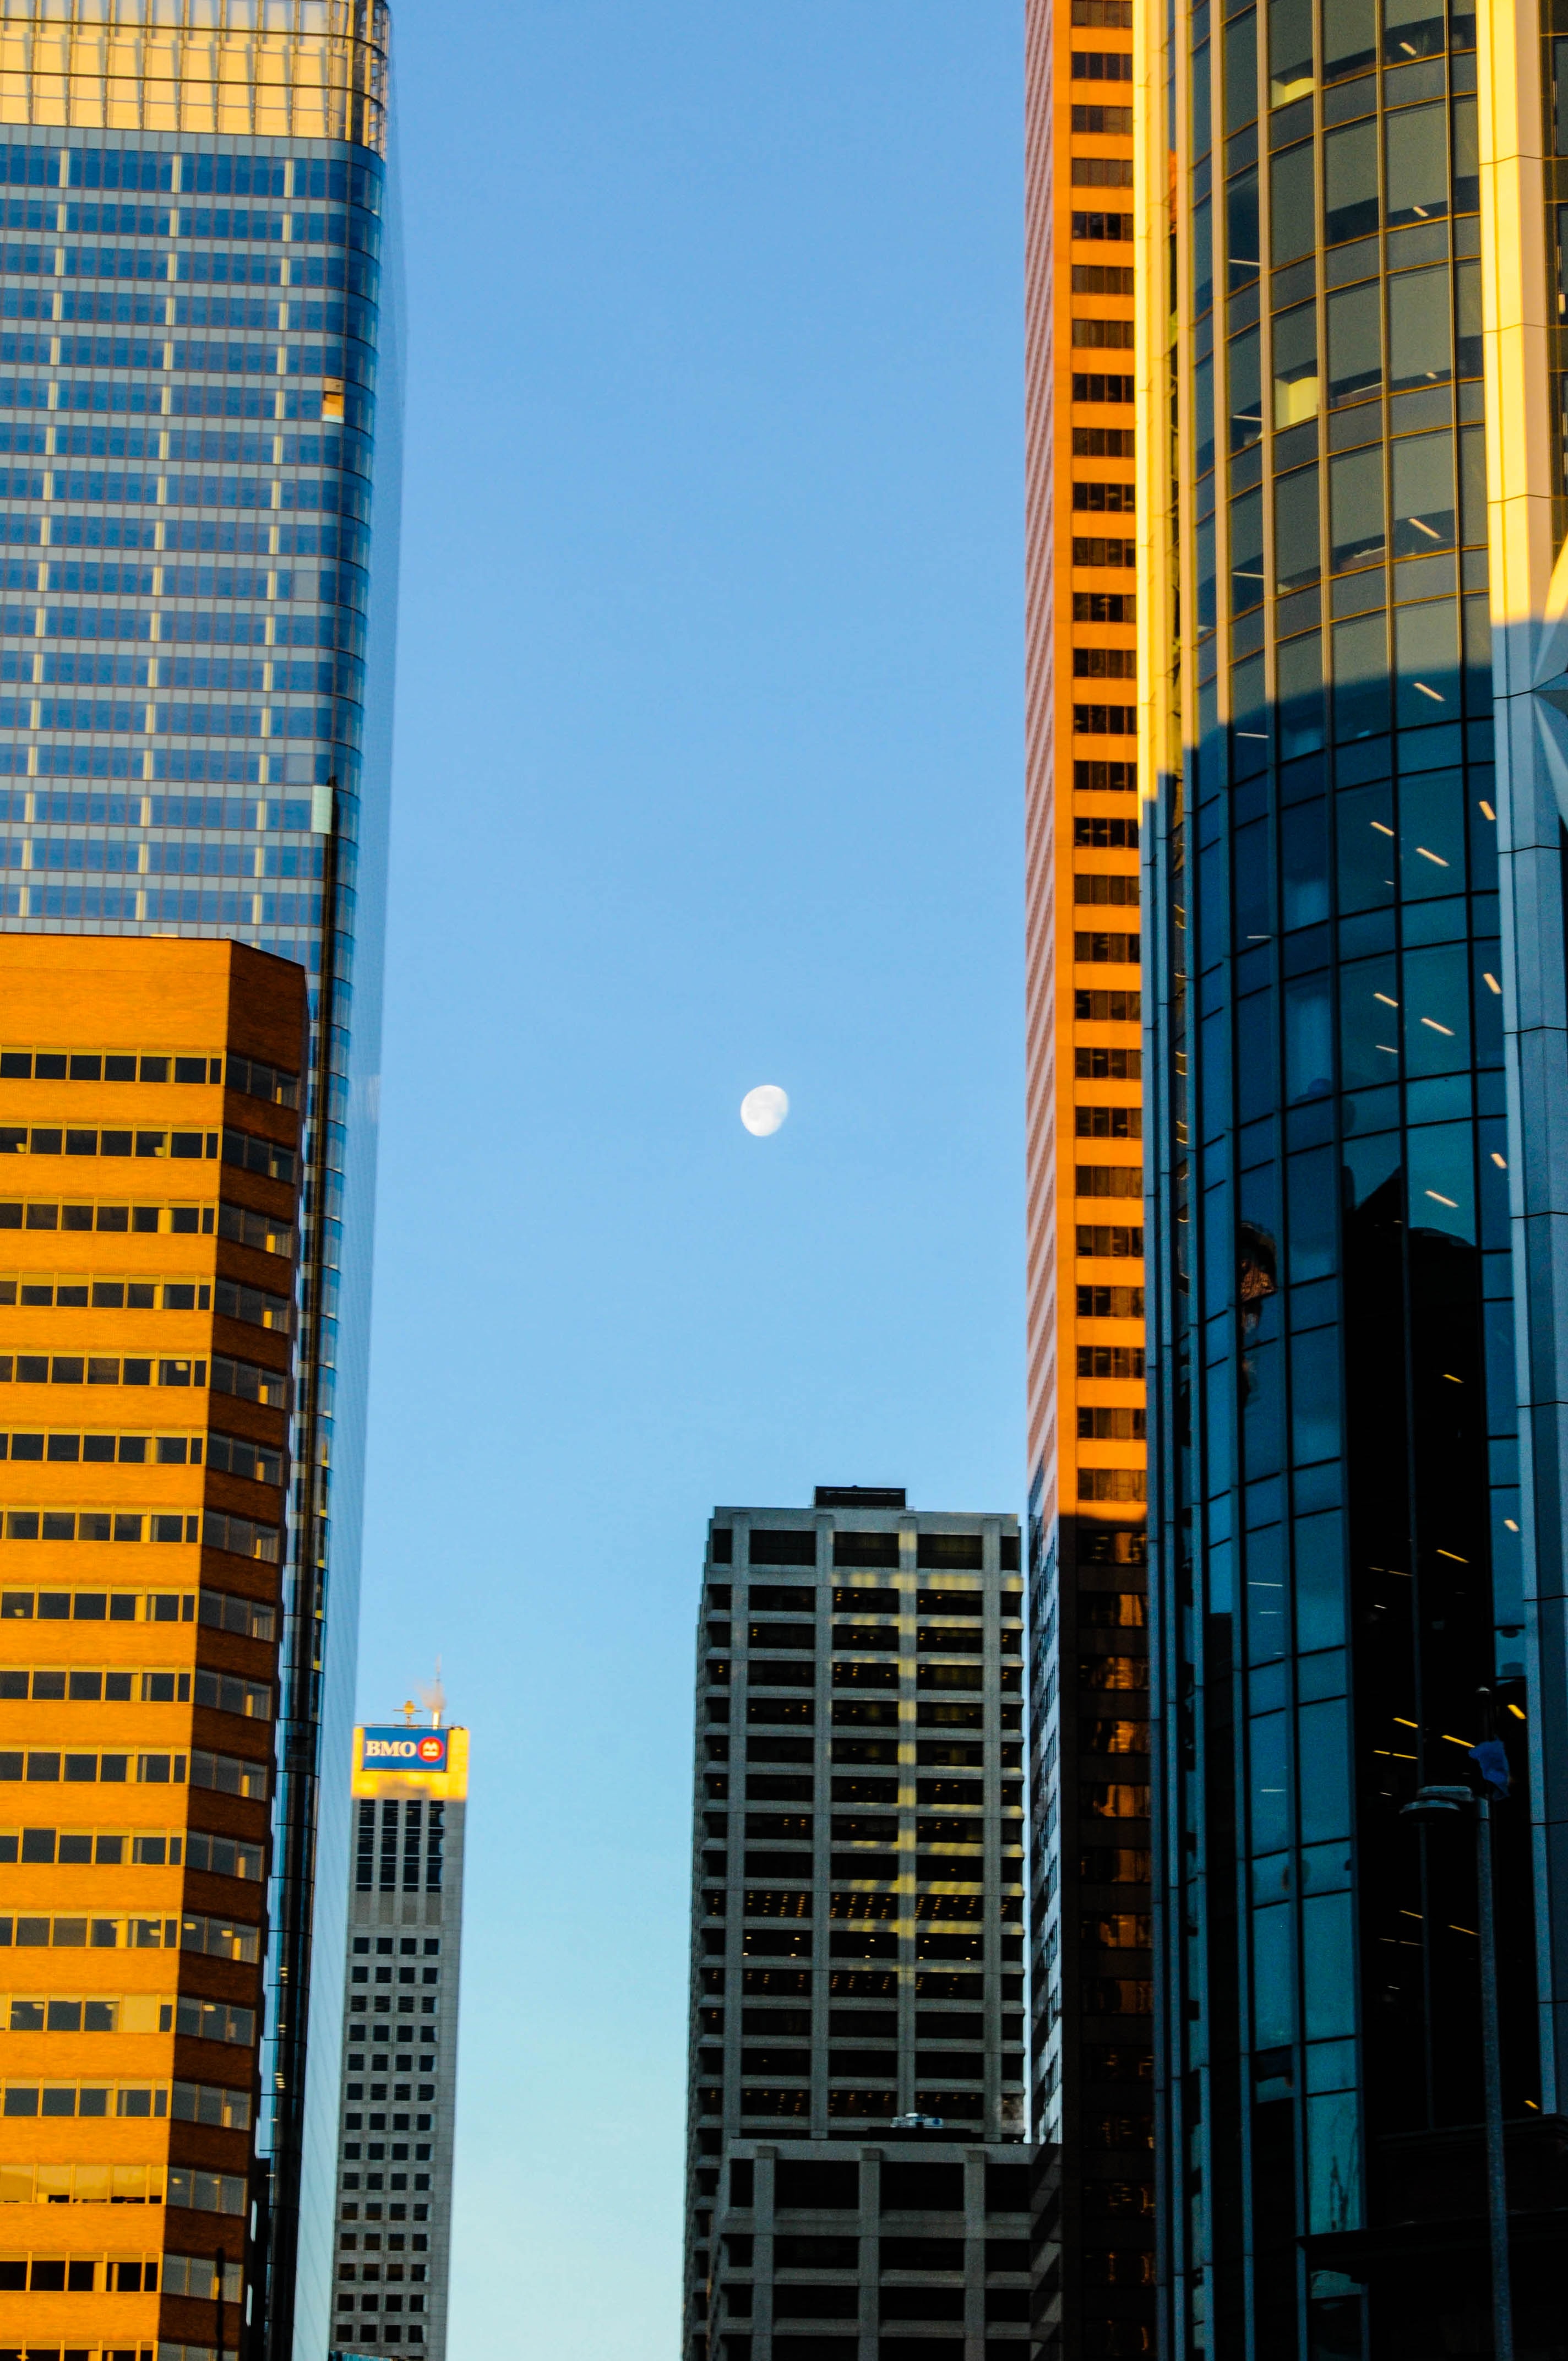 Architecture skyscrapers, moon, cities, building 8k Backgrounds